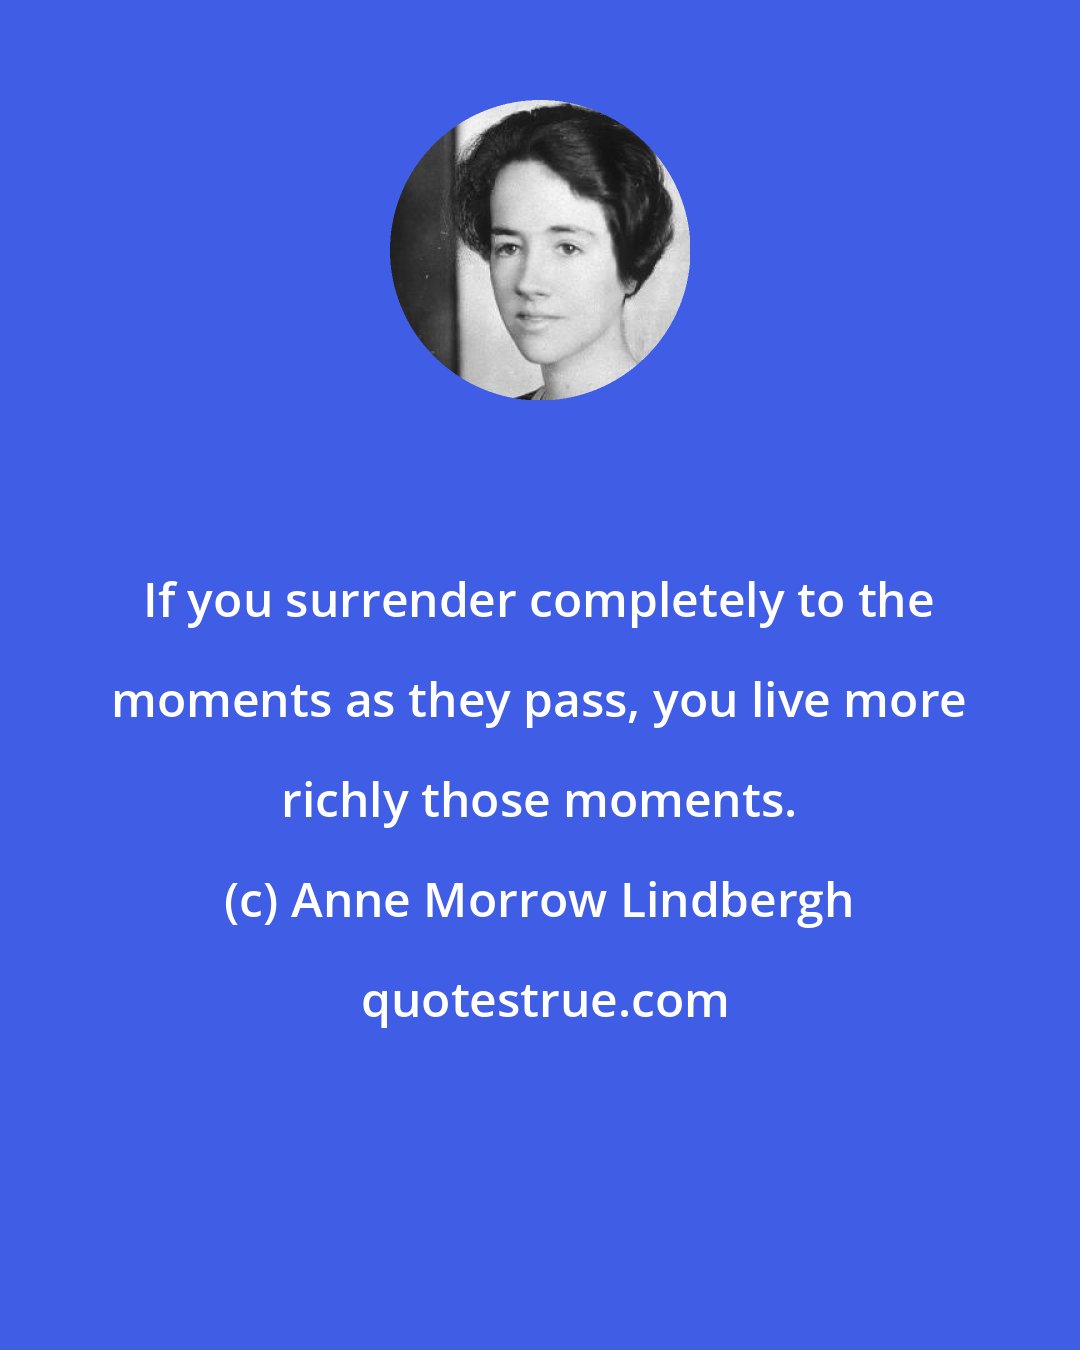 Anne Morrow Lindbergh: If you surrender completely to the moments as they pass, you live more richly those moments.